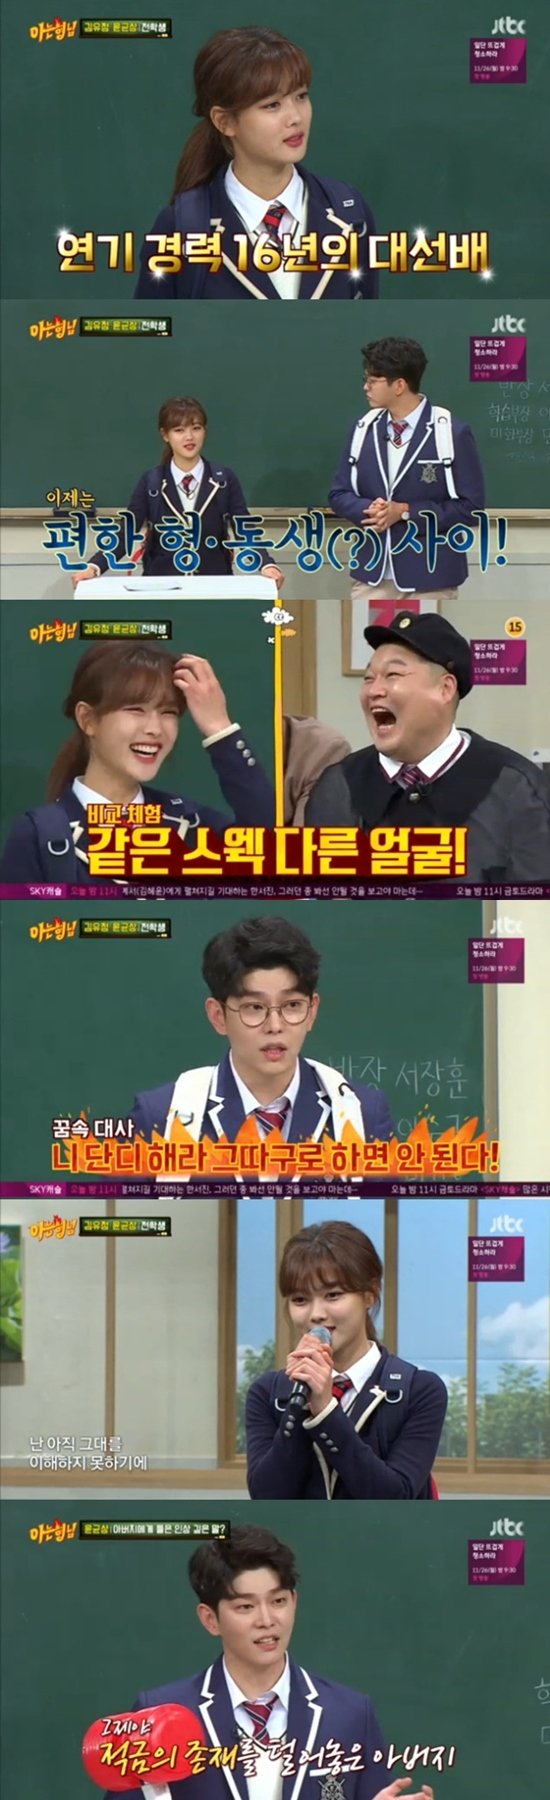 Kim Yoo-jung and Yoon Kyun-sang appeared as a transfer student on JTBC Knowing Brother broadcast on the 24th.On this day, Kim Yoo-jung and Yoon Kyun-sang cleaned up with the appearance and promoted the drama.The two are appearing together in the JTBC New Moon drama Once Clean Up, which is about to be broadcasted on the 26th.Kim Yoo-jung explained, I heal Yoon Kyun-sang with my dirtyness. So Seo Jang-hoon laughed, saying, I can heal with cleanness.The first impressions of each other were also revealed: I am a lot older, but Yu-Jeong is the presidential candidate, so I was worried a lot.I had to say senior, but Yu-Jeong first said, Ill say youre brother. Please be comfortable. Kim Yoo-jung said, I call most of them brother. It was difficult to call them Uncle or brother because they were shooting since they were young.So I use the honorific name or call it my brother. Yoon Kyun-sang has entertainment woes; he says: I like entertainment, but I havent been good at making appearances in the meantime.Still, I almost saw Knowing Brother. He added that he had a dream before appearing in Knowing Brother.Yoon Kyun-sang said: I was talking in my dream and it wasnt funny, so I didnt respond; Hodong called me and said, Do your Dandy.I should not do that. He embarrassed Kang Ho-dong. My brothers laughed at him saying, I have a Kang Ho-dong victim in my dreams.Kim Yoo-jung then asked about his hobby, I fish boats.I go out for about two hours and catch bluefin tuna or bushy.  The longest thing I have caught is about 1m 30cm. My brothers suspected that thats enough for me, and Kim Yoo-jung released a photo of the evidence.Kim Yoo-jung explained, What I do is Bushley fishing, its called a big game, not a reel, but a fishing rod.Get me right corner followed: Yoon Kyun-sang made an impressive remark from his father after his debut a problem.He said, My father never opposed what I was doing, but he thought he would fail as an actor.When the reversal ended and the savings expired, he asked me, Can I have something delicious with my friends with this money? I did not even know there was a savings.I feel like Im feeling a lot, and Im feeling a lot. Kim Yoo-jung mentioned the special diet of the three siblings: Kim Yoo-jung said, I have a brother and sister, and the tastes of the three people are different.I eat ramen noodles at the same time, but I eat them at the same time. He said, I fought a lot with eating.I eat a box of tangerines in a day, and my brother eats three when we eat a piece of fruit. My sister and I feel a sense of crisis and I have a habit of eating quickly from then on. 